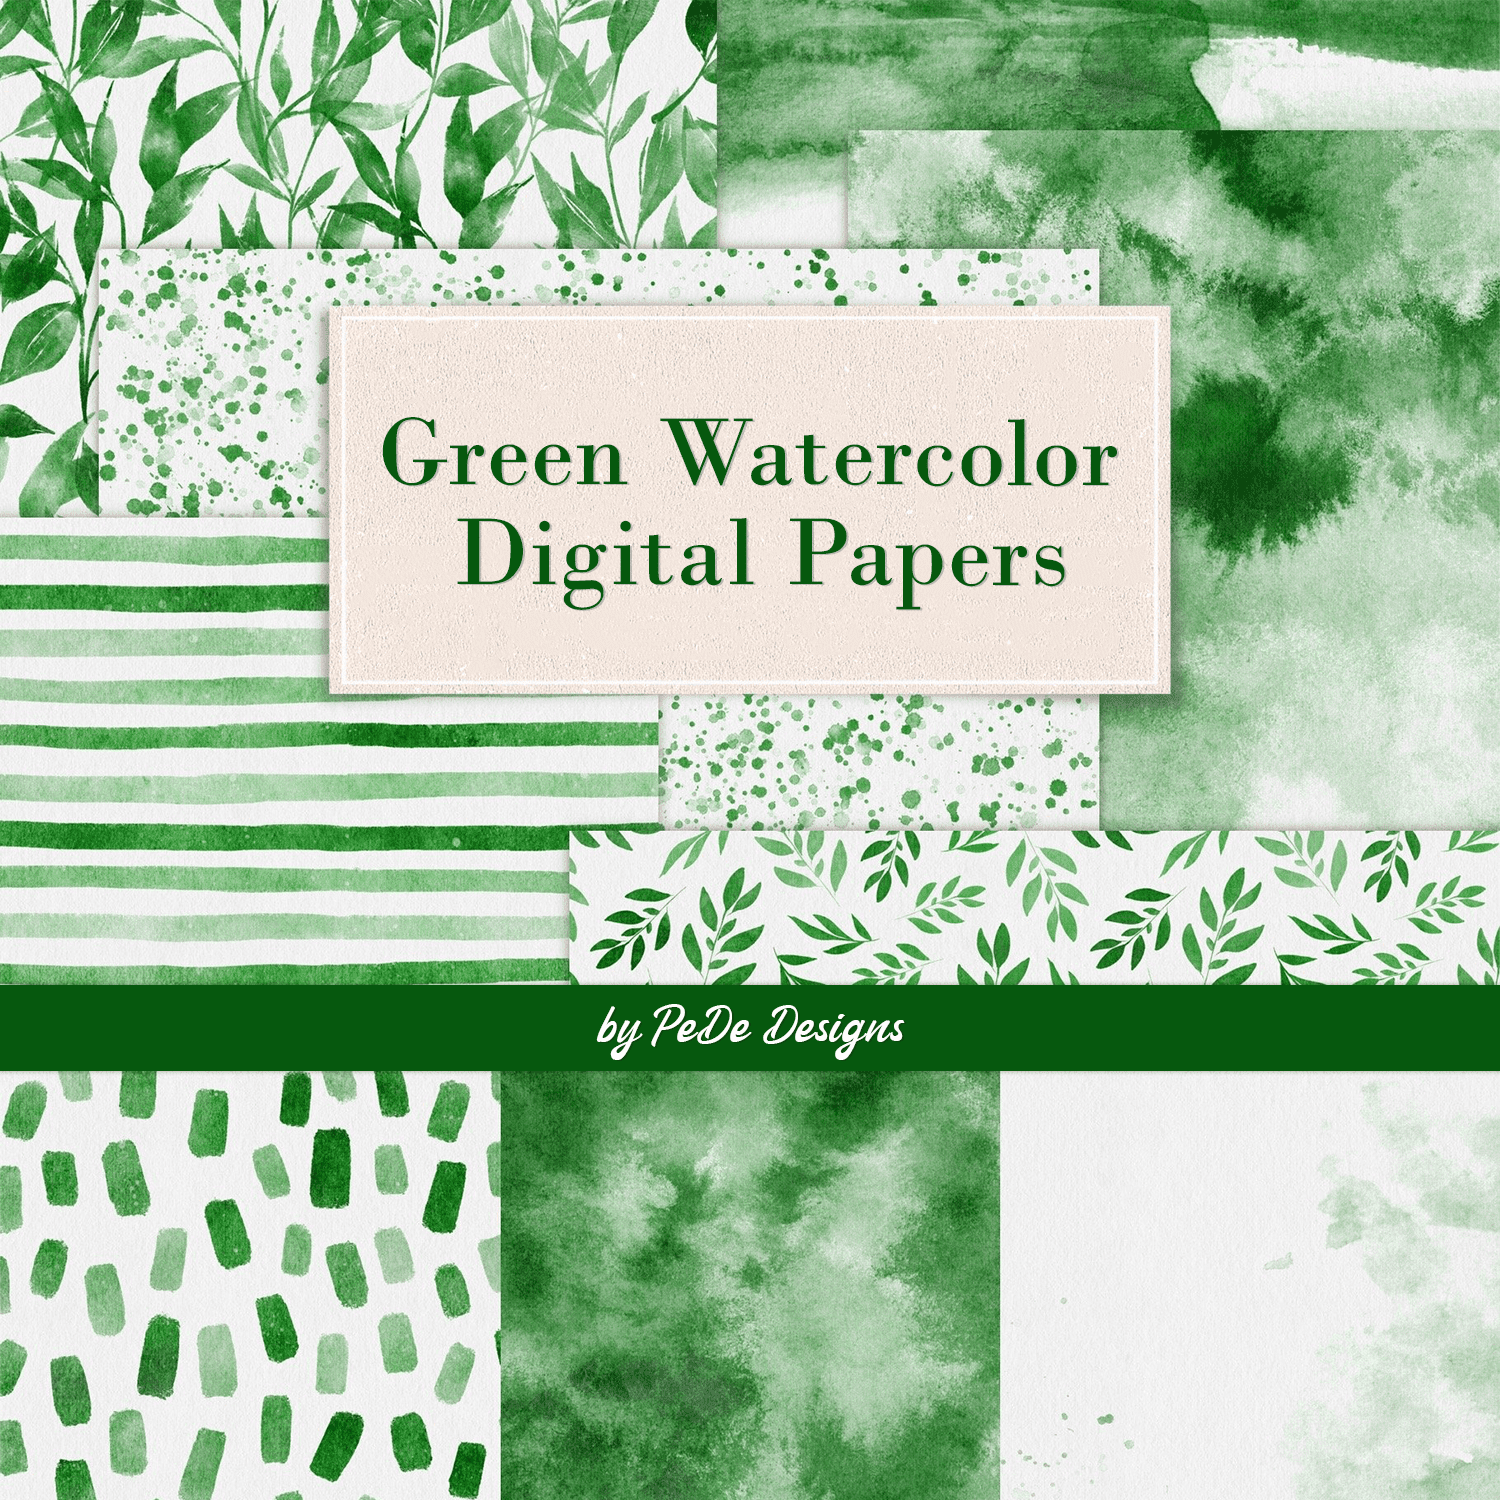 Green Watercolor Digital Papers cover.